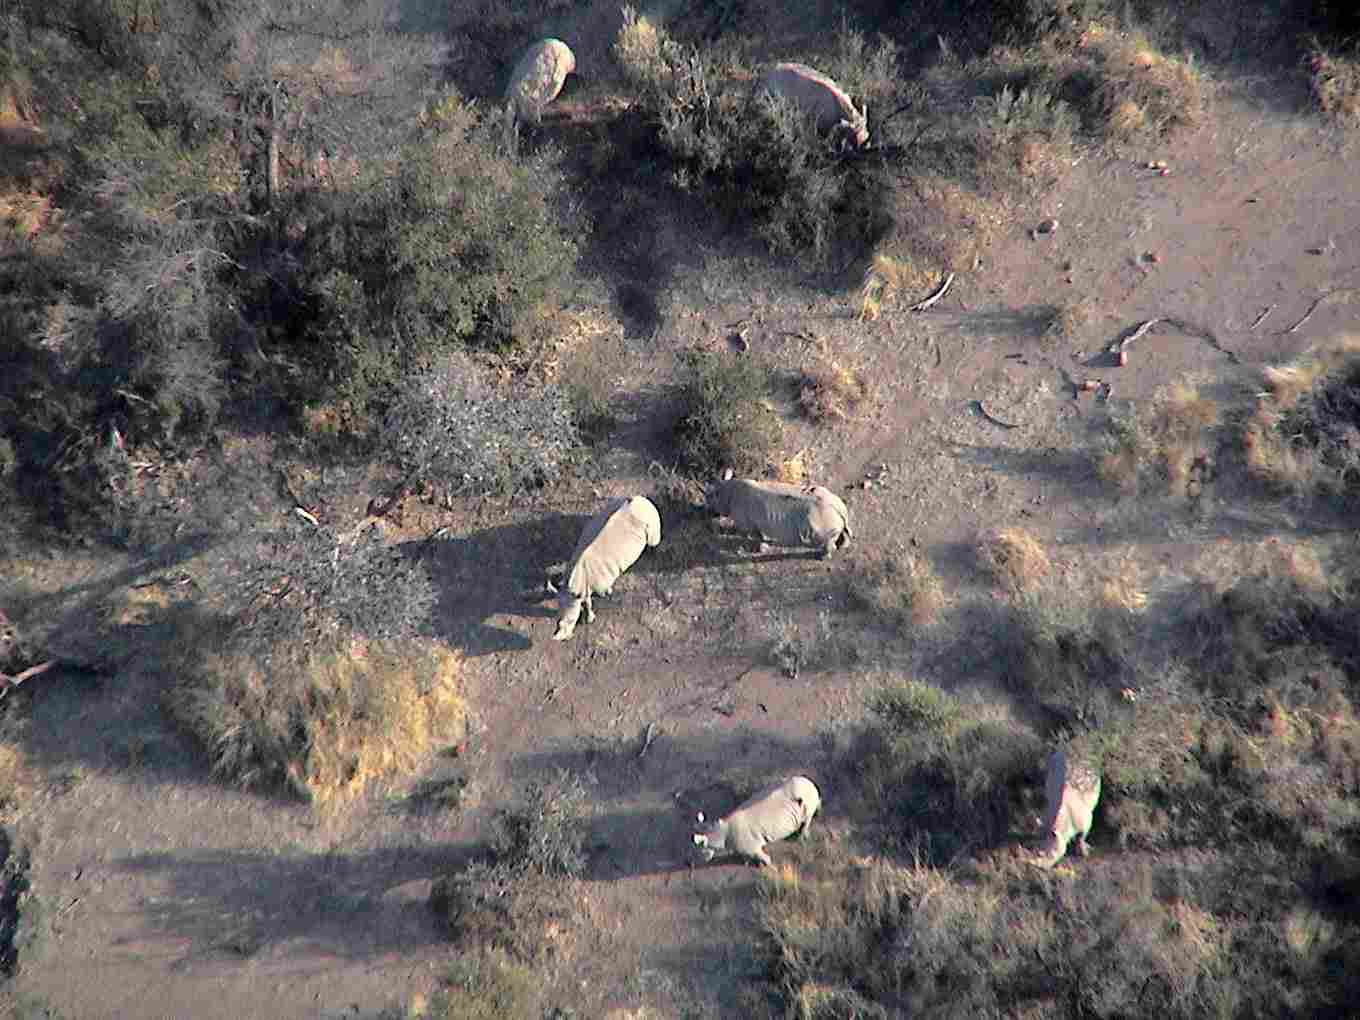 Looking down at several rhinos.  Photo by FG.